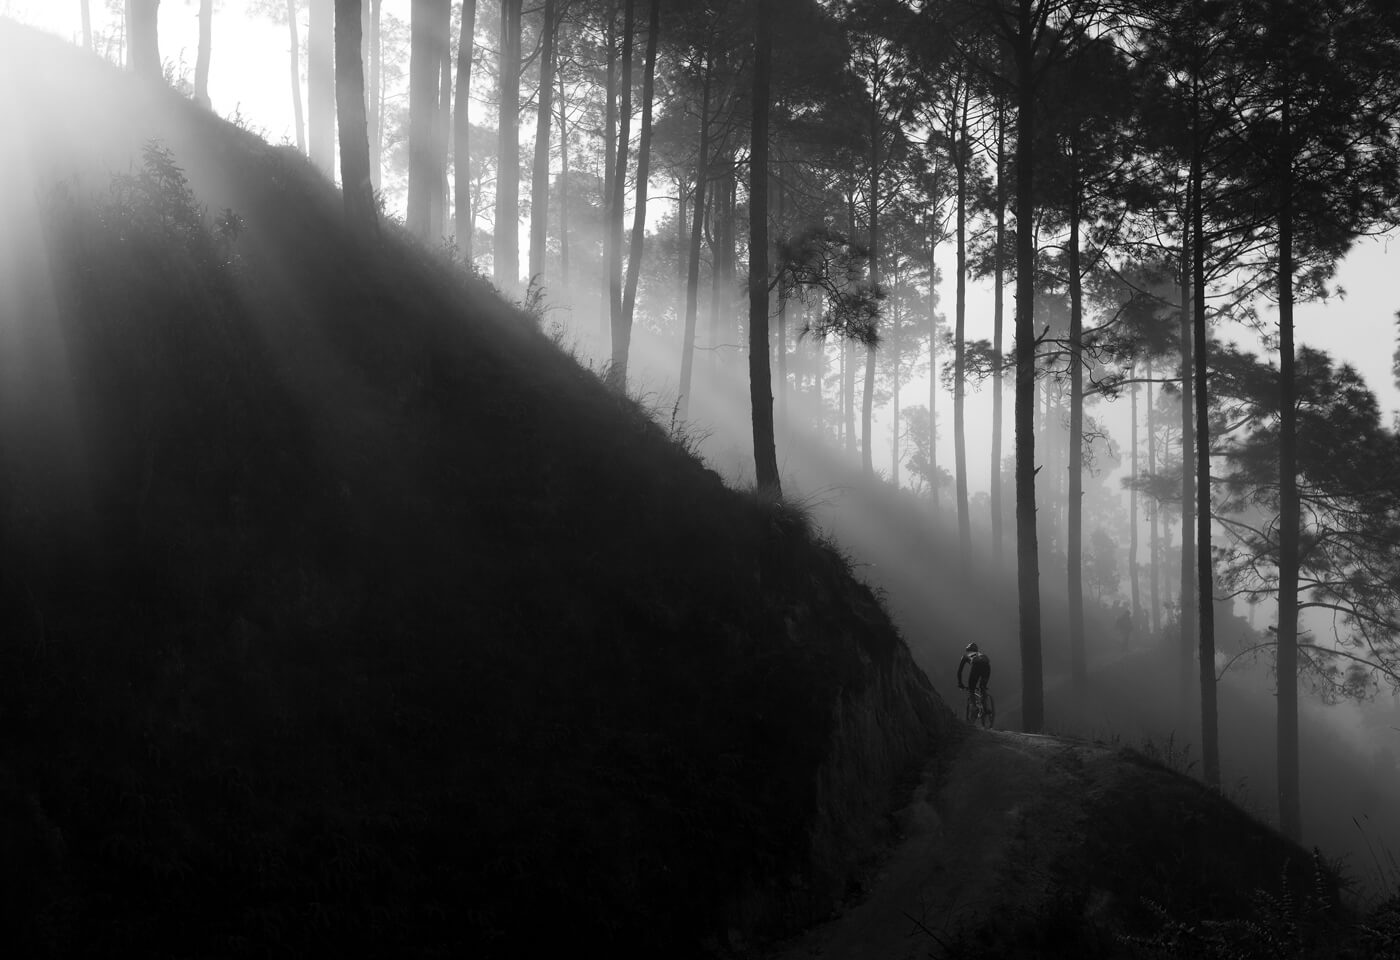 image of a forest in the outskirts of Kathmandu by Krystle Wright